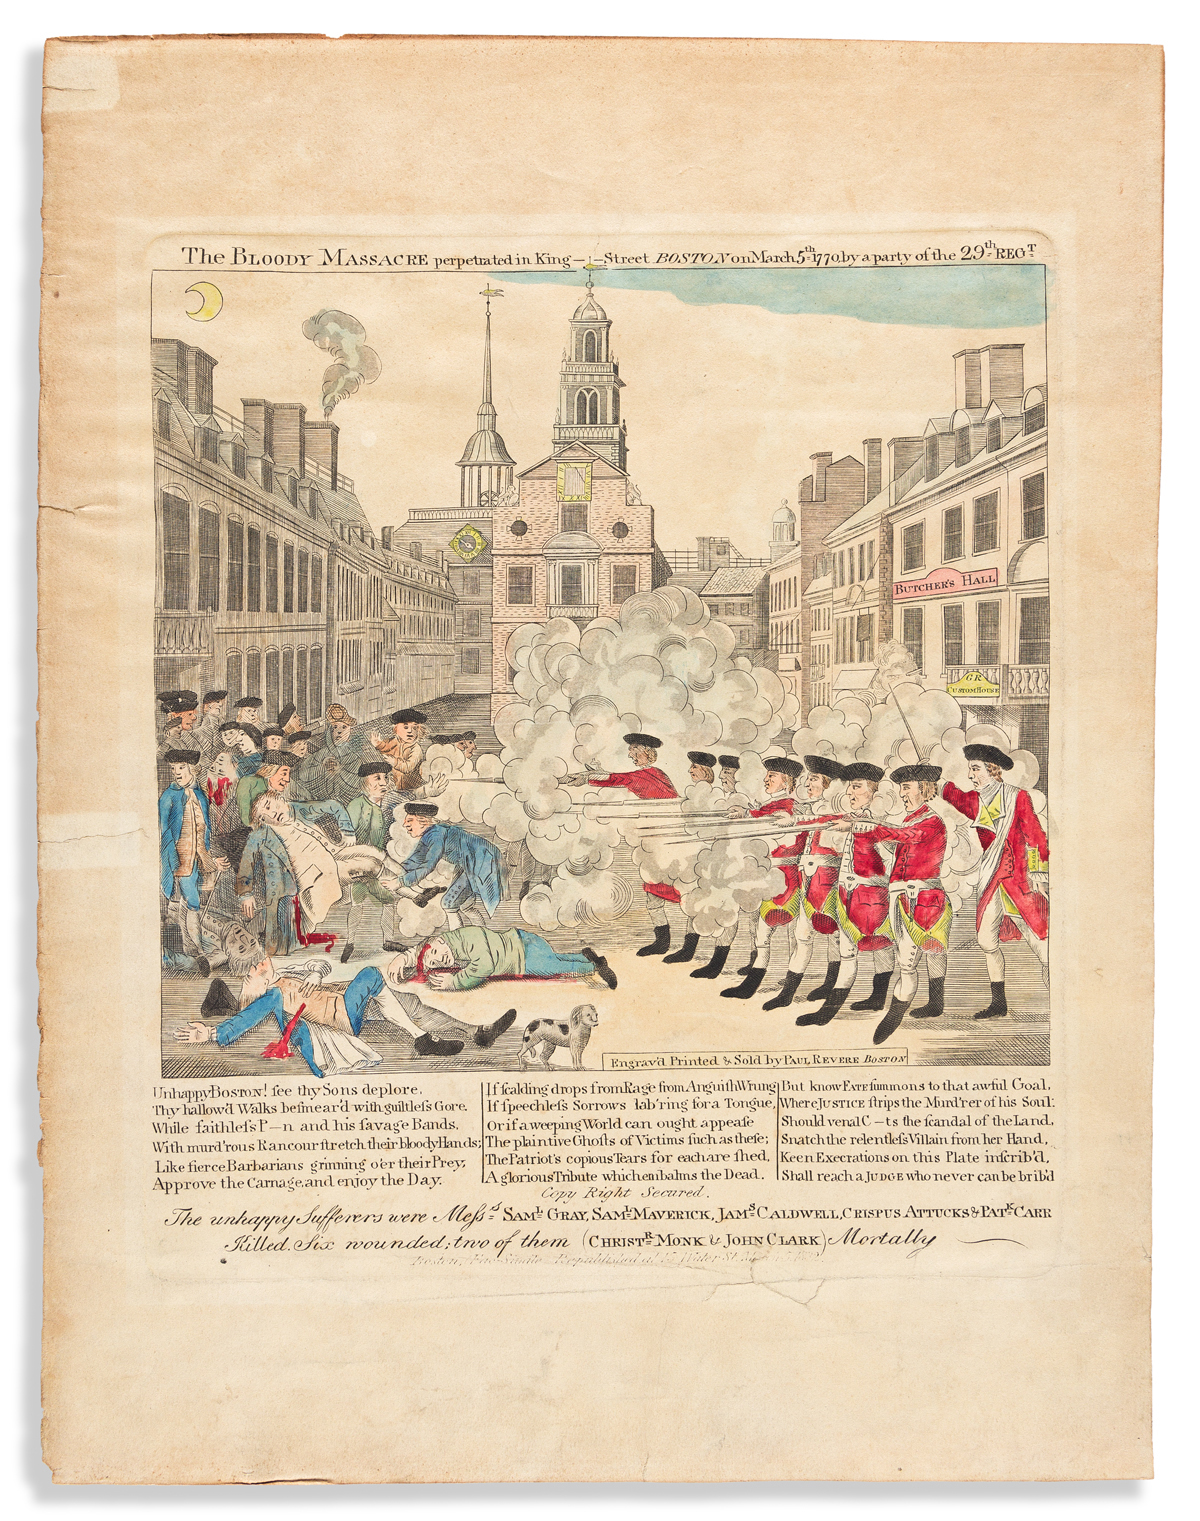 (REVOLUTION--PRELUDE.) [Stratton], engraver; after Revere. The Bloody Massacre Perpetrated in King-Street, Boston.